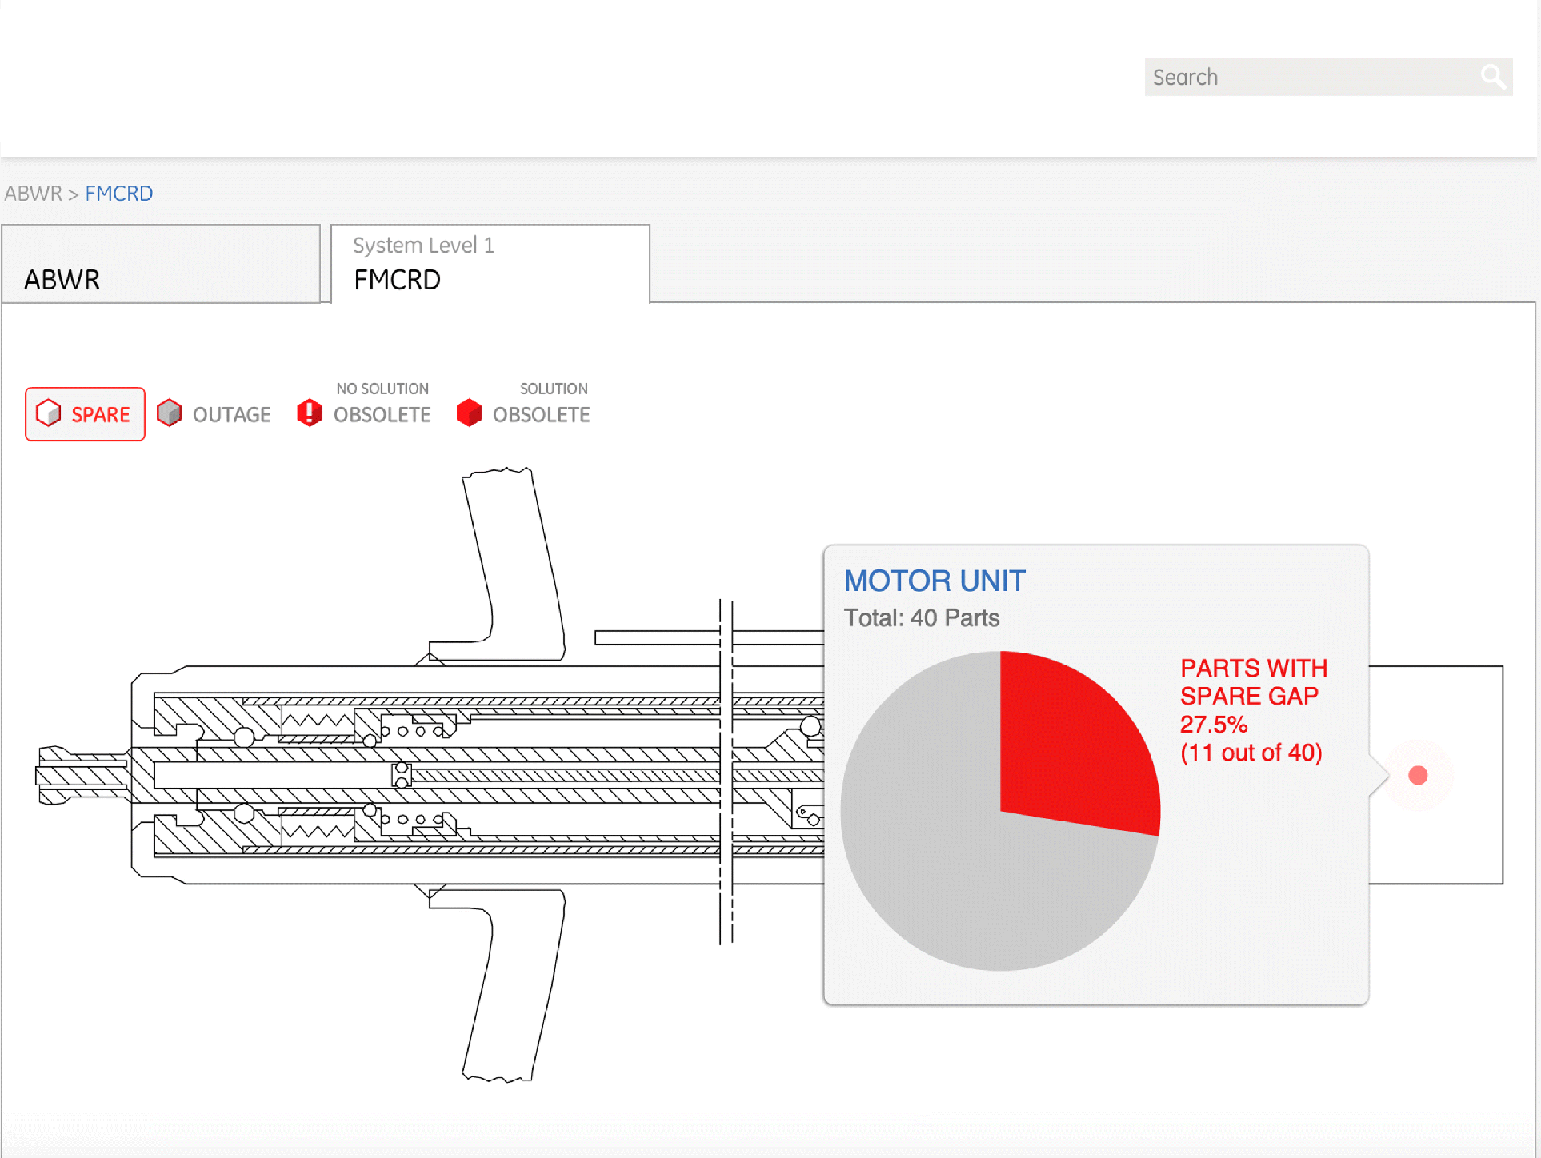 A screenshot depicting the construction of new nuclear reactors. Instead of poring through reams and reams of spreadsheets, red pulsating spots dynamically display where their clients need to focus their attention.